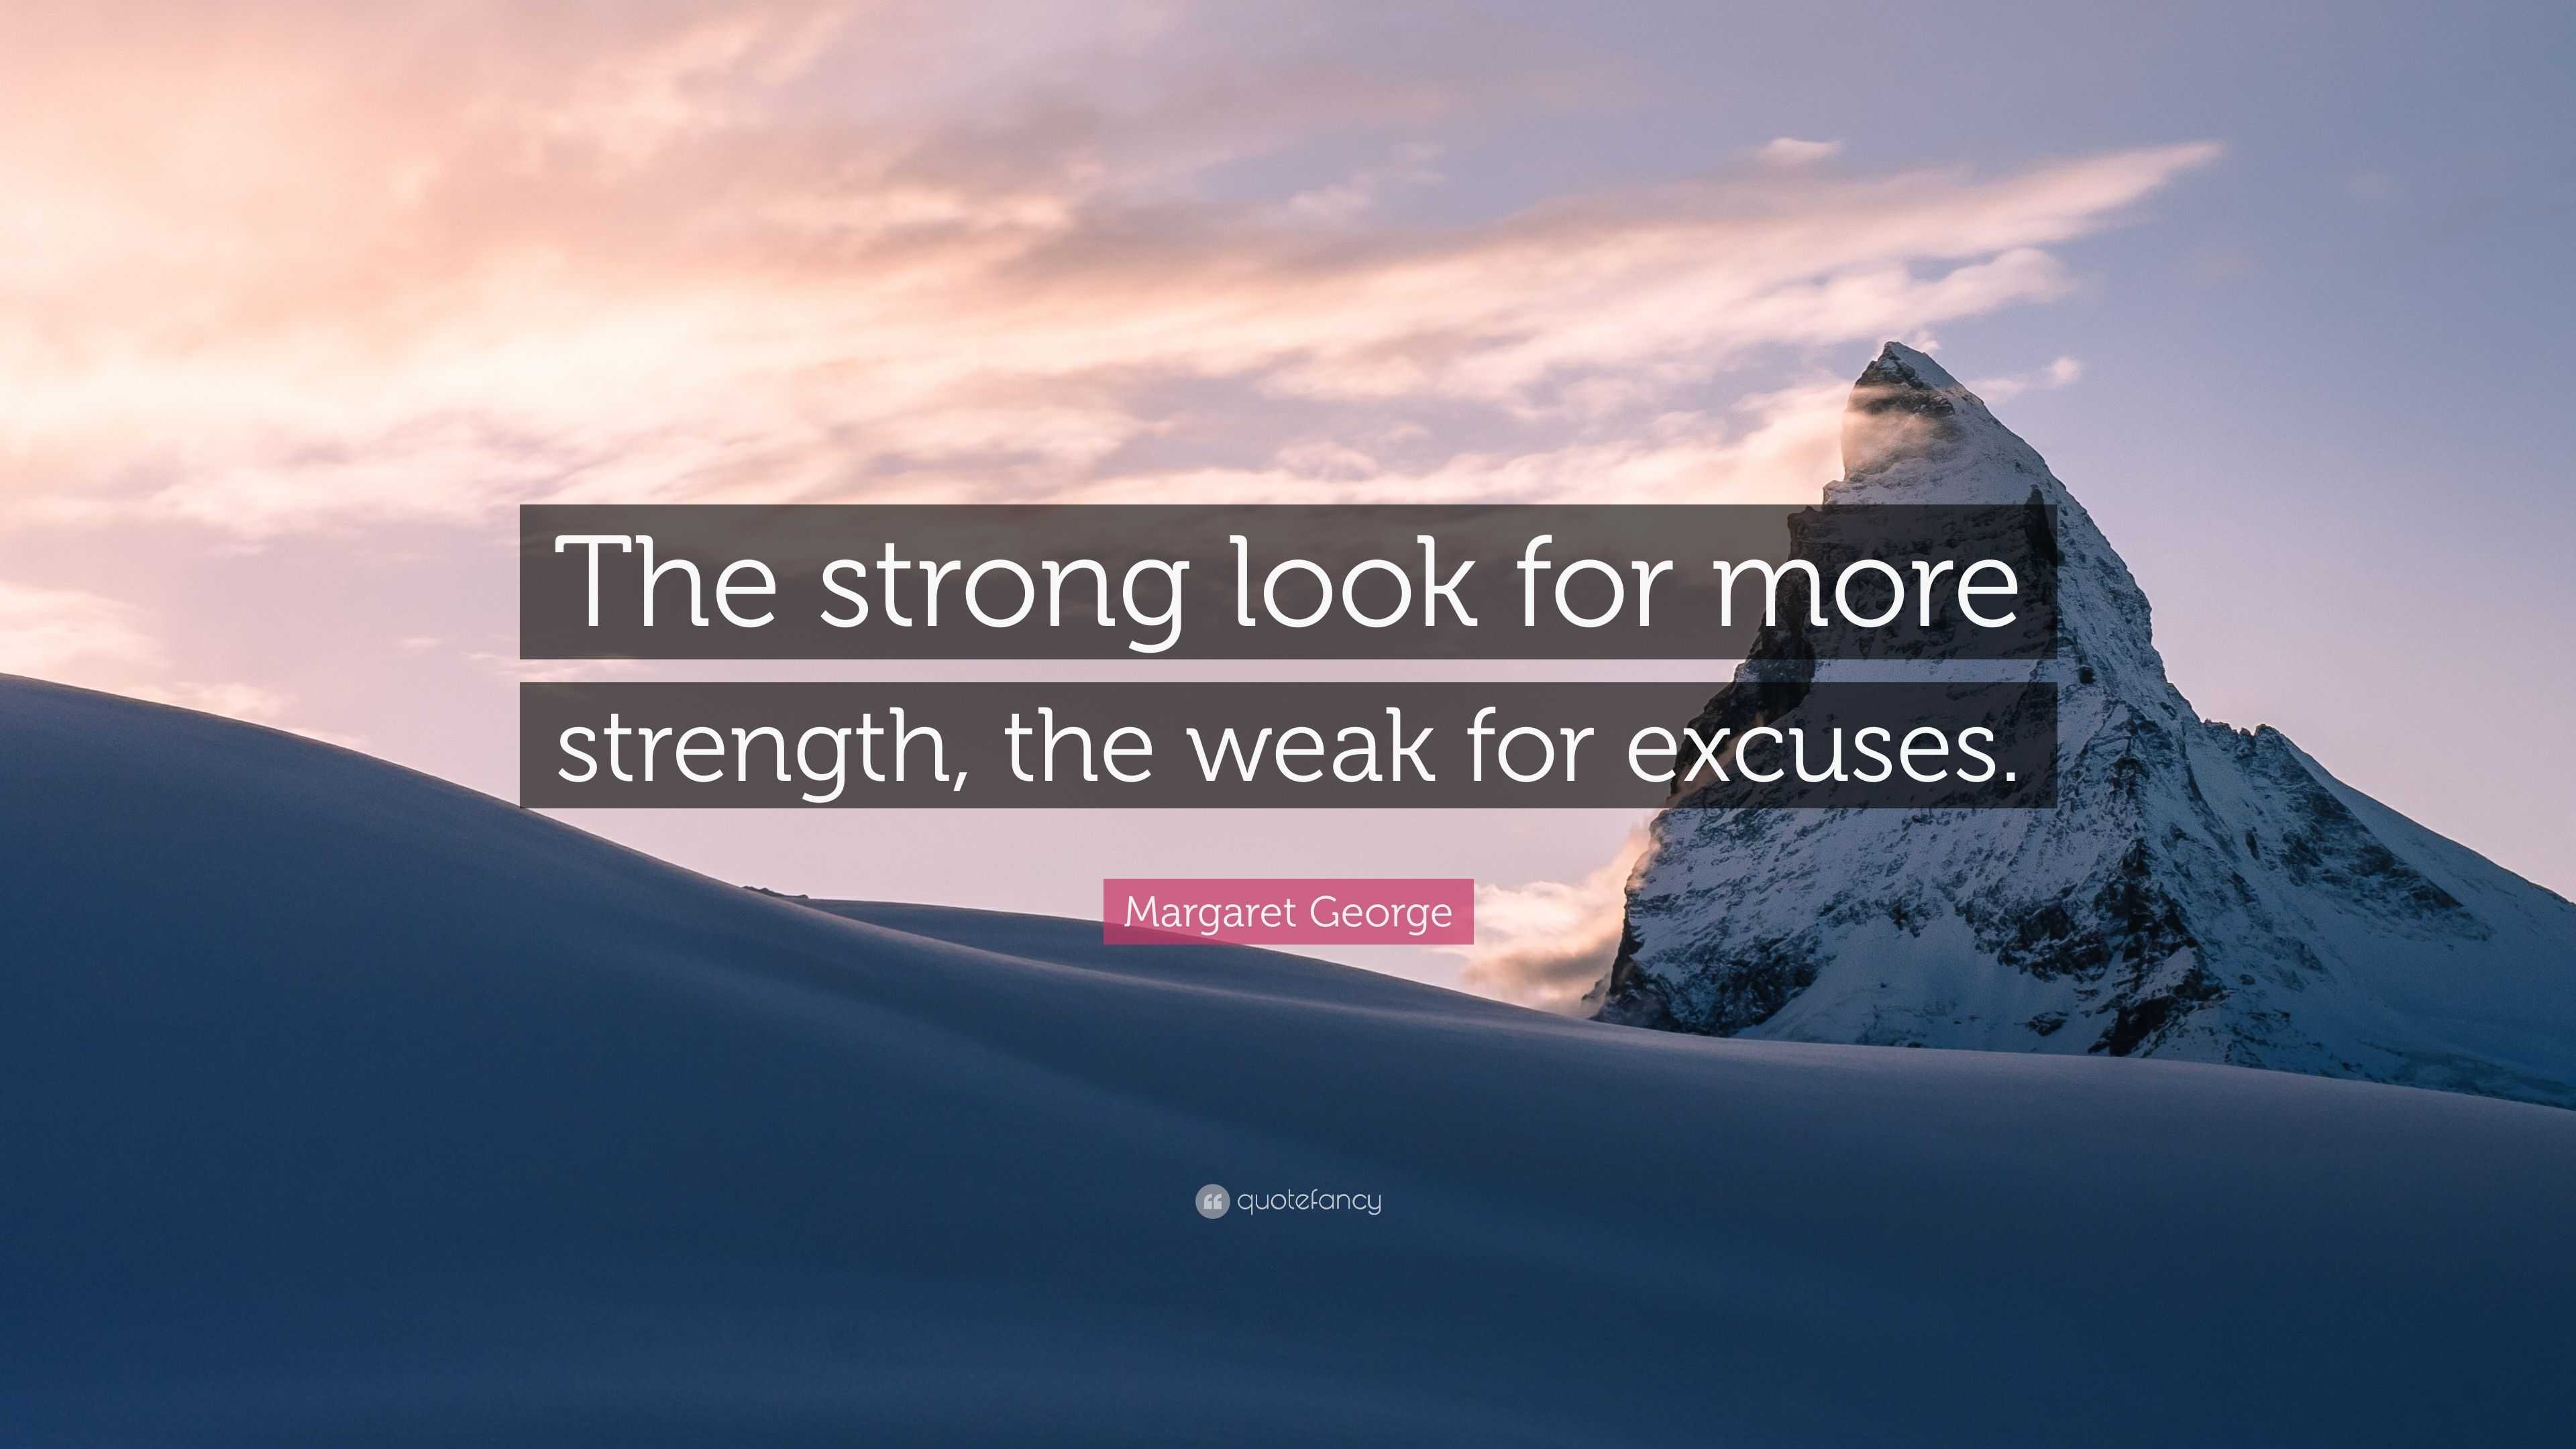 Margaret George Quote: “The strong look for more strength, the